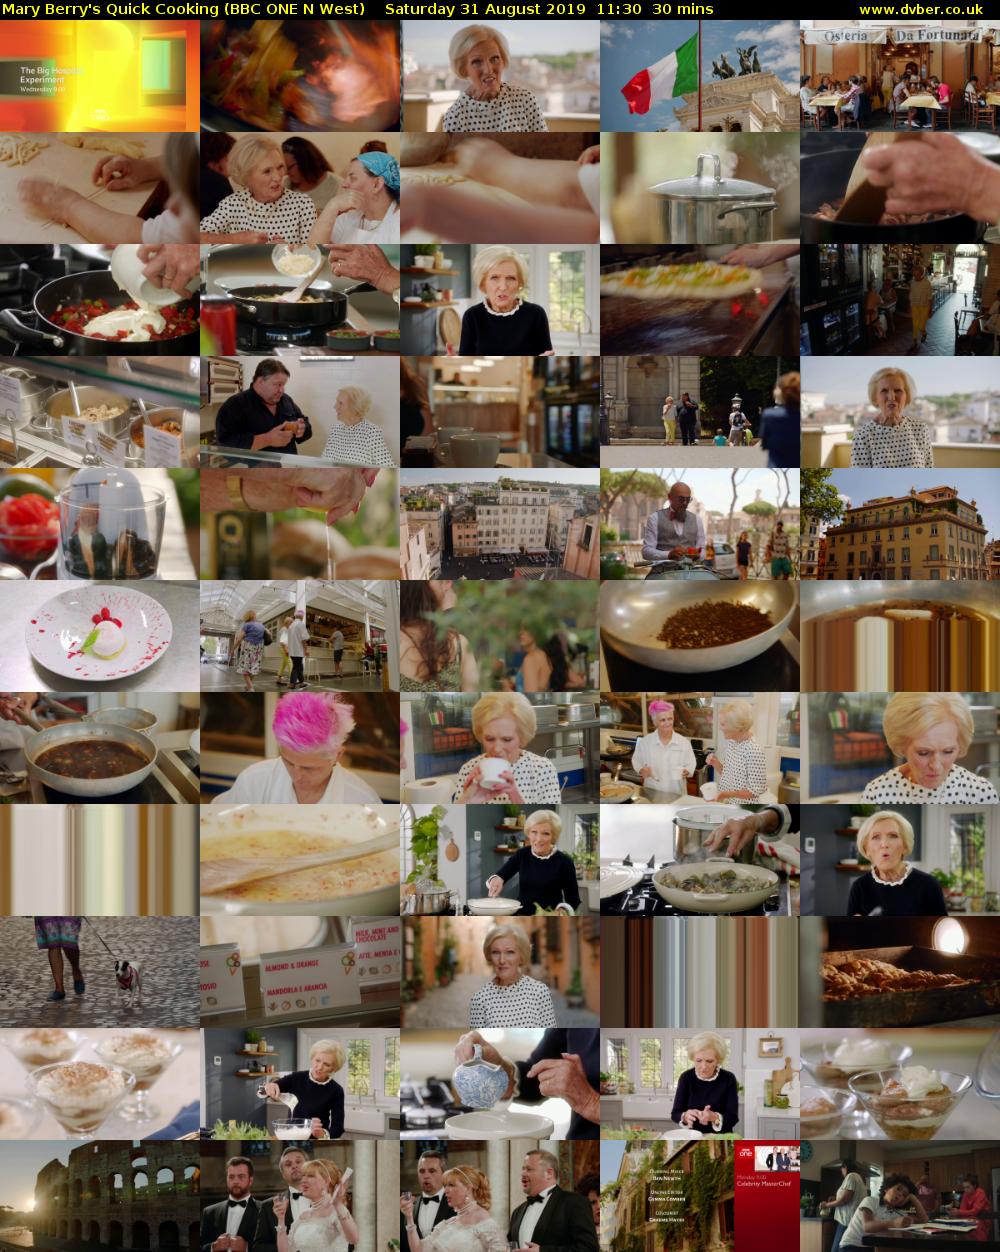 Mary Berry's Quick Cooking (BBC ONE N West) Saturday 31 August 2019 11:30 - 12:00